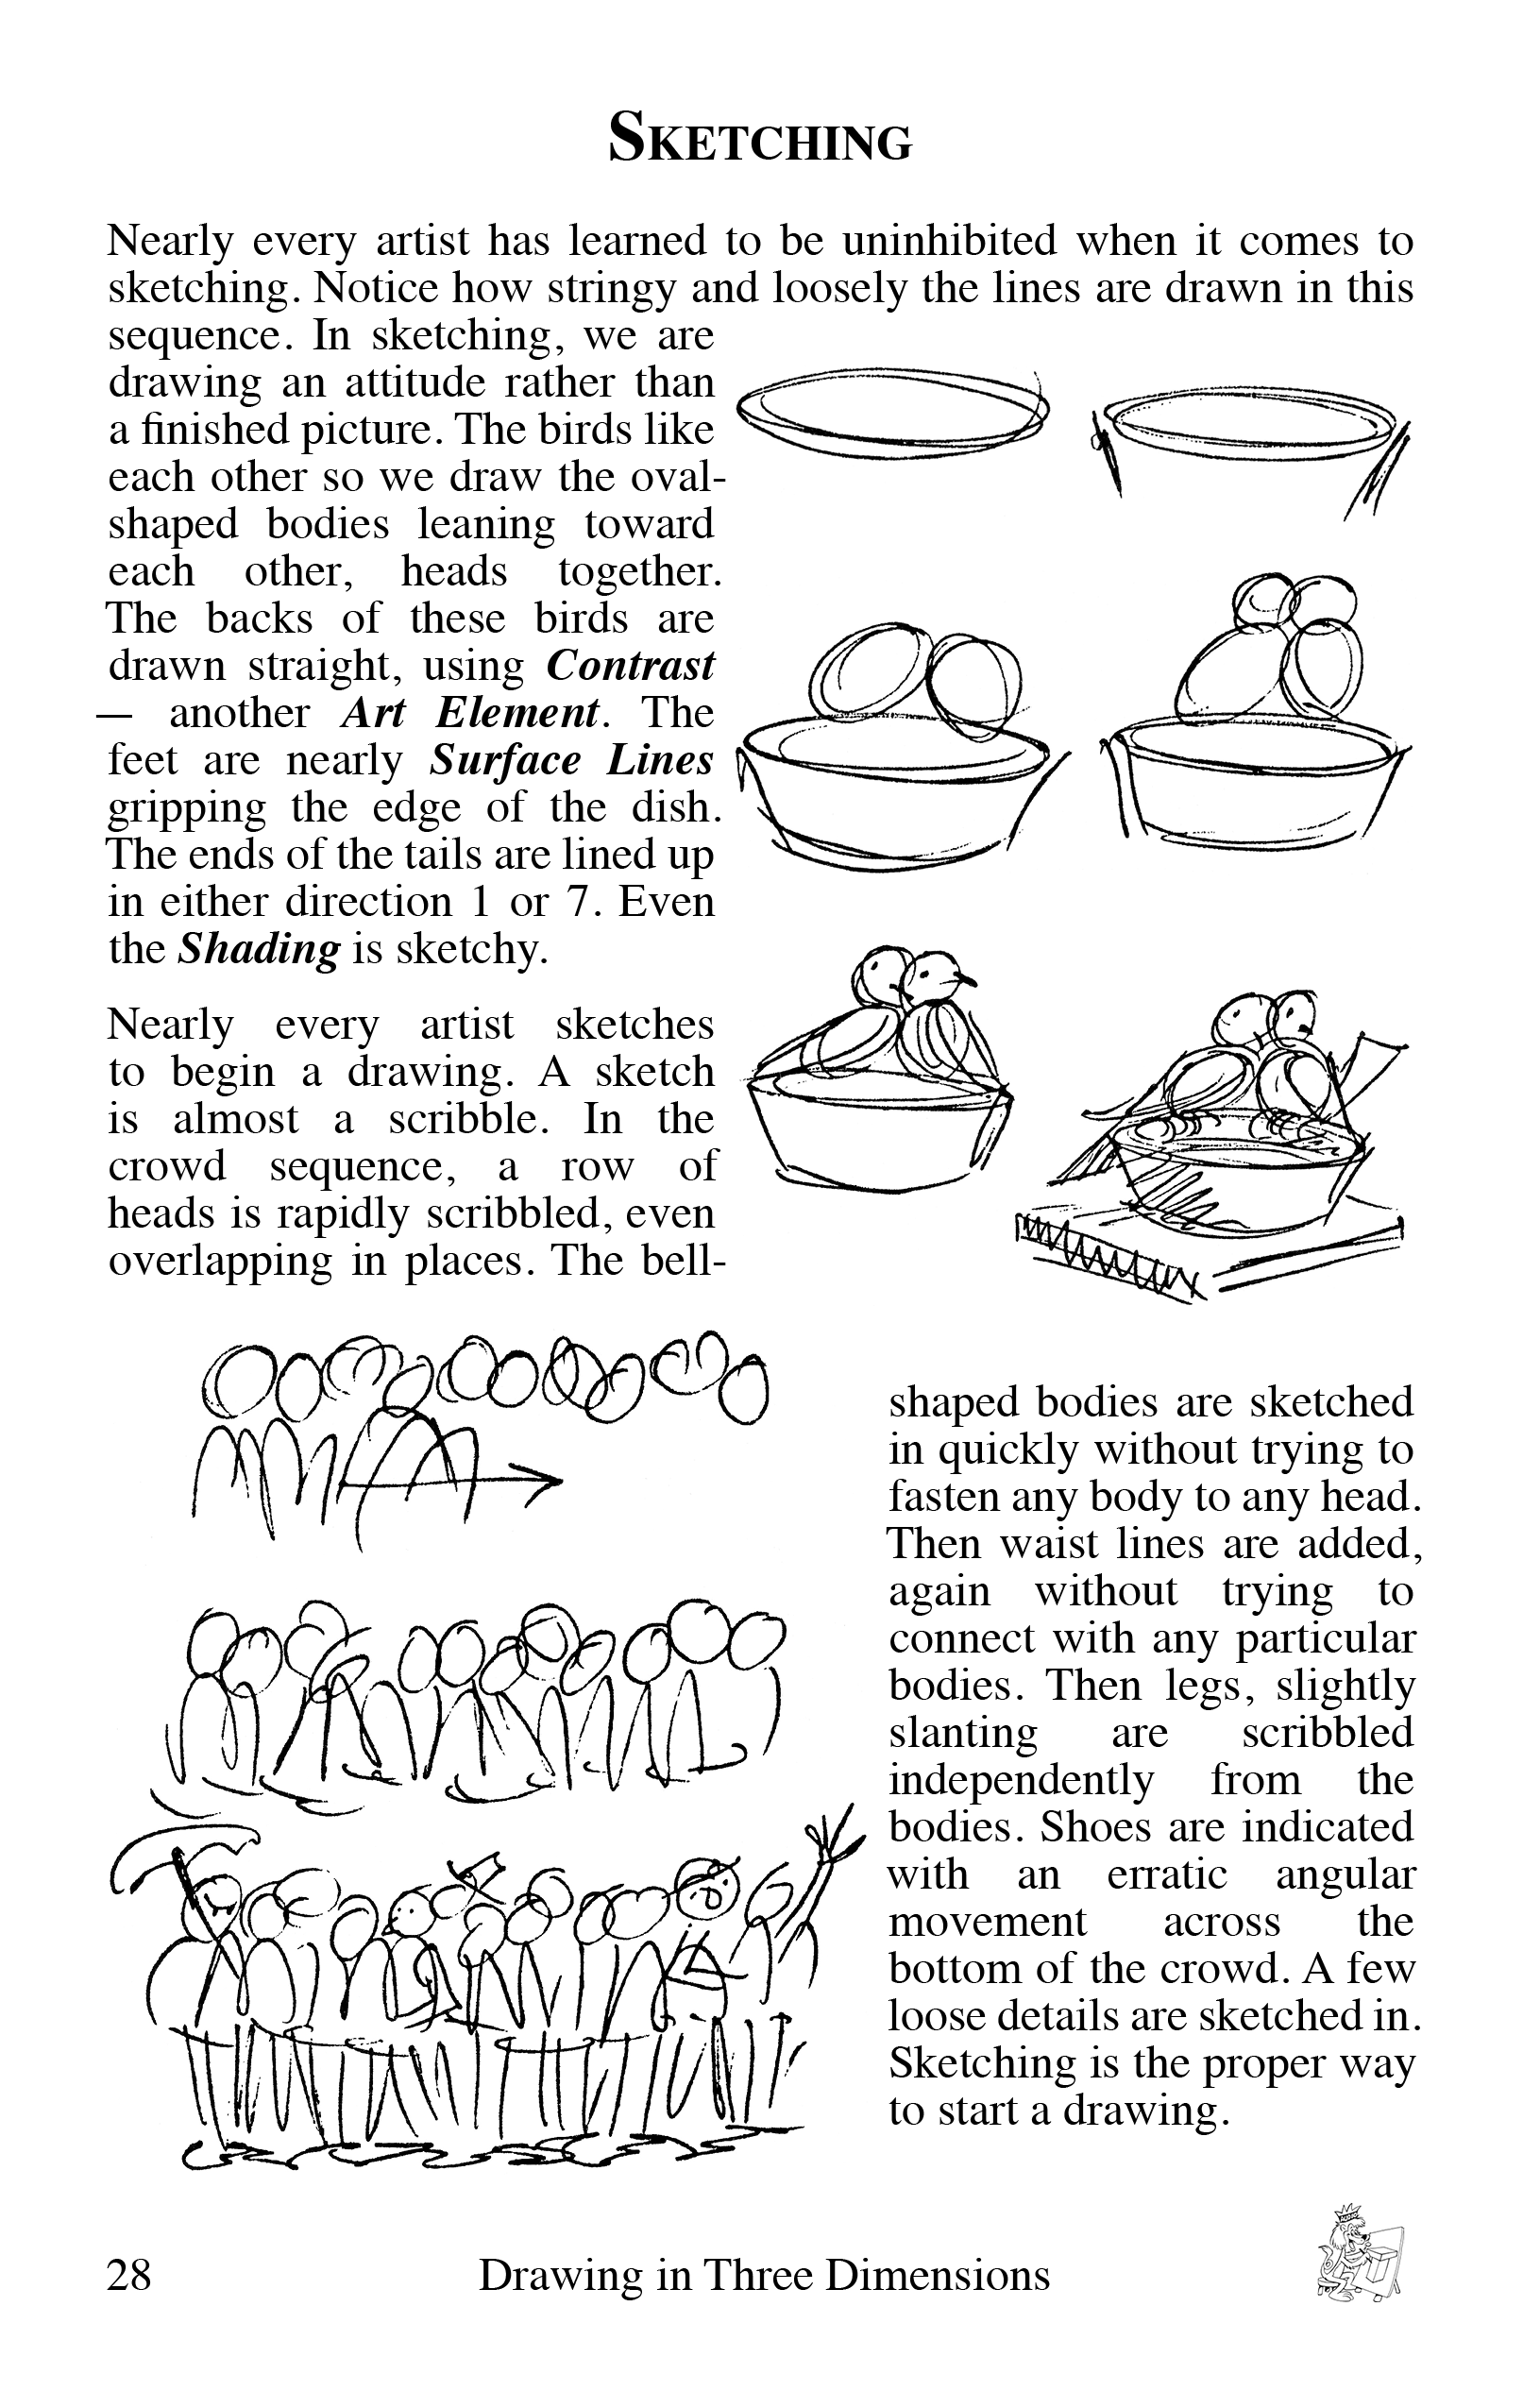 Sketching sample page from the book Drawing in Three Dimensions by Bruce McIntyre